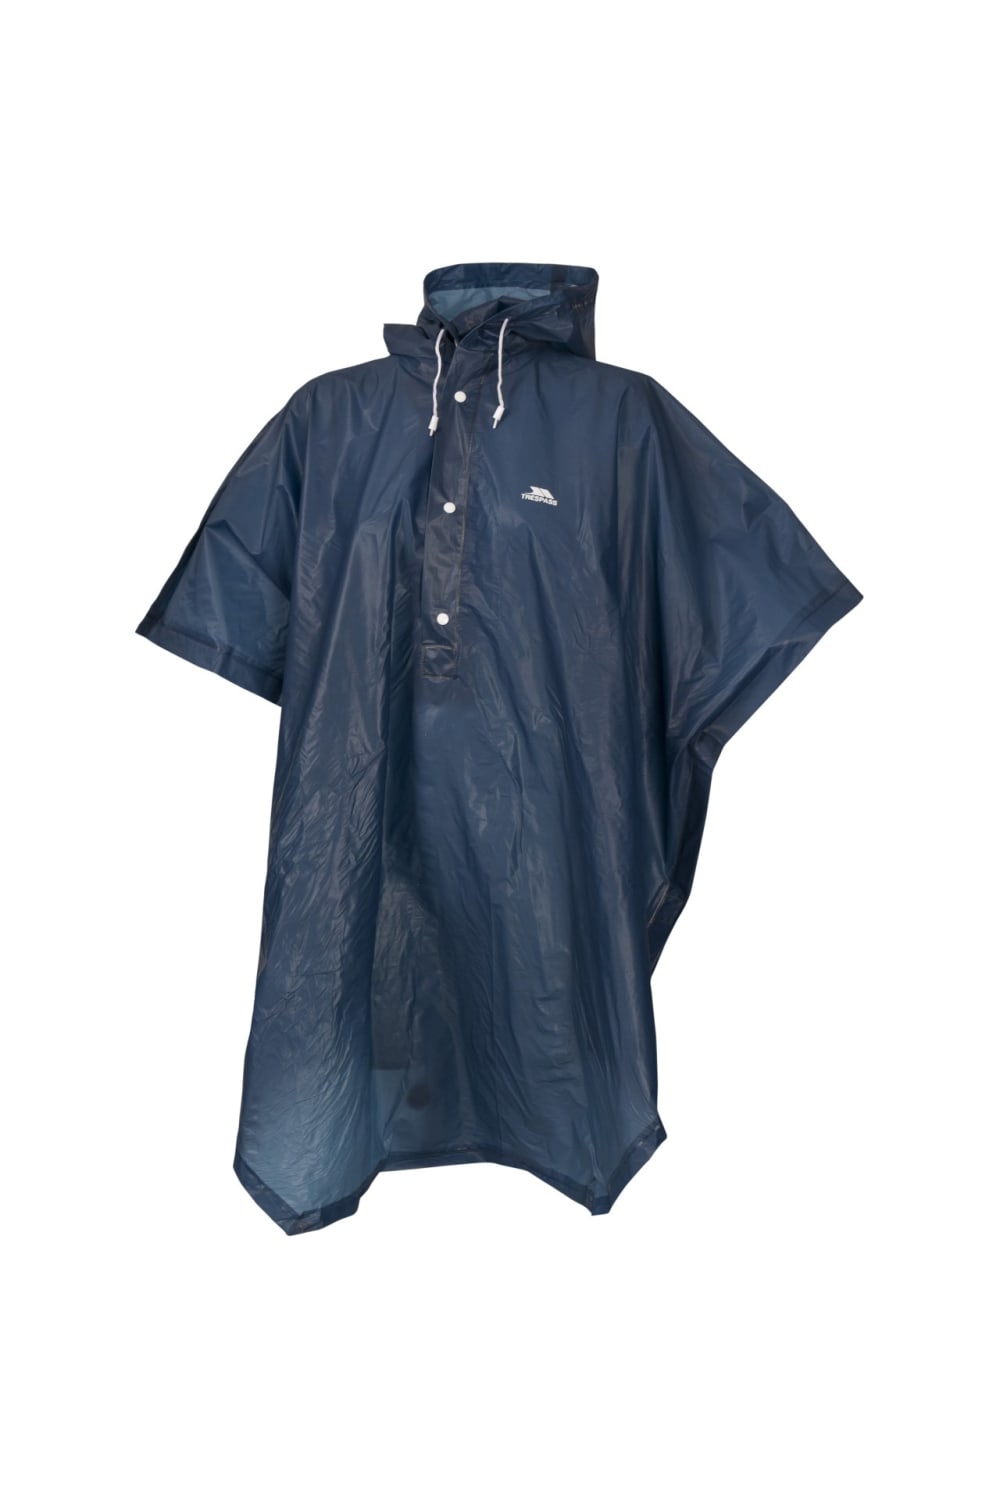 Trespass Adults Unisex Canopy Packaway Poncho (Navy Blue)